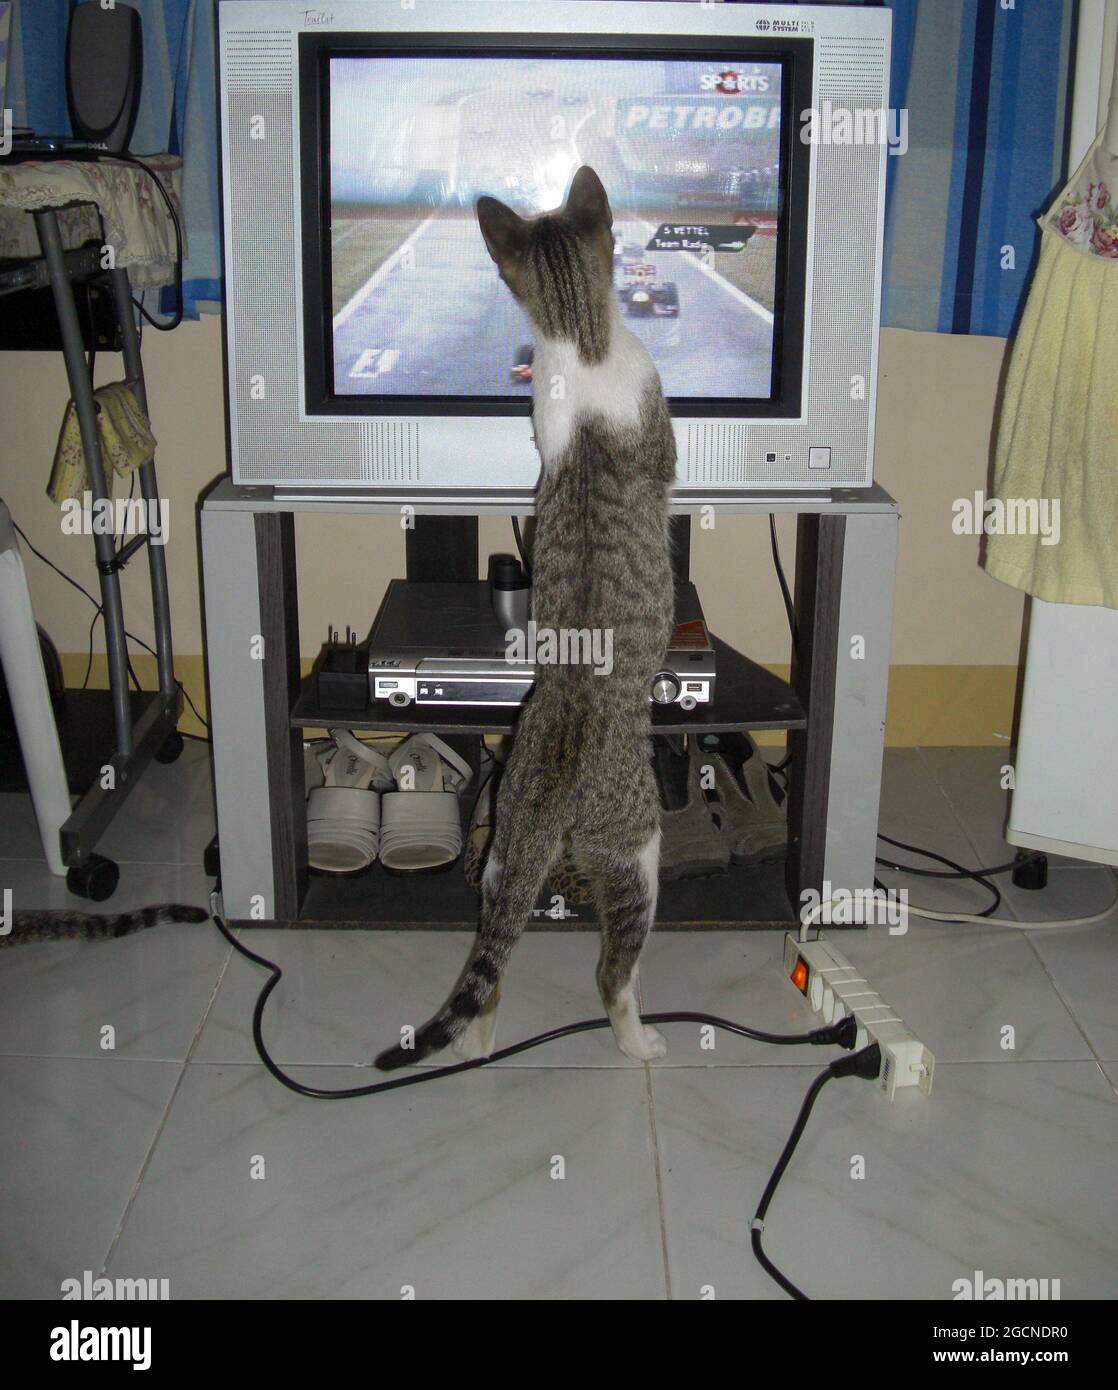 Cat likes to watch TV in Puerto Galera on the Philippines 26.11.2012 Stock Photo